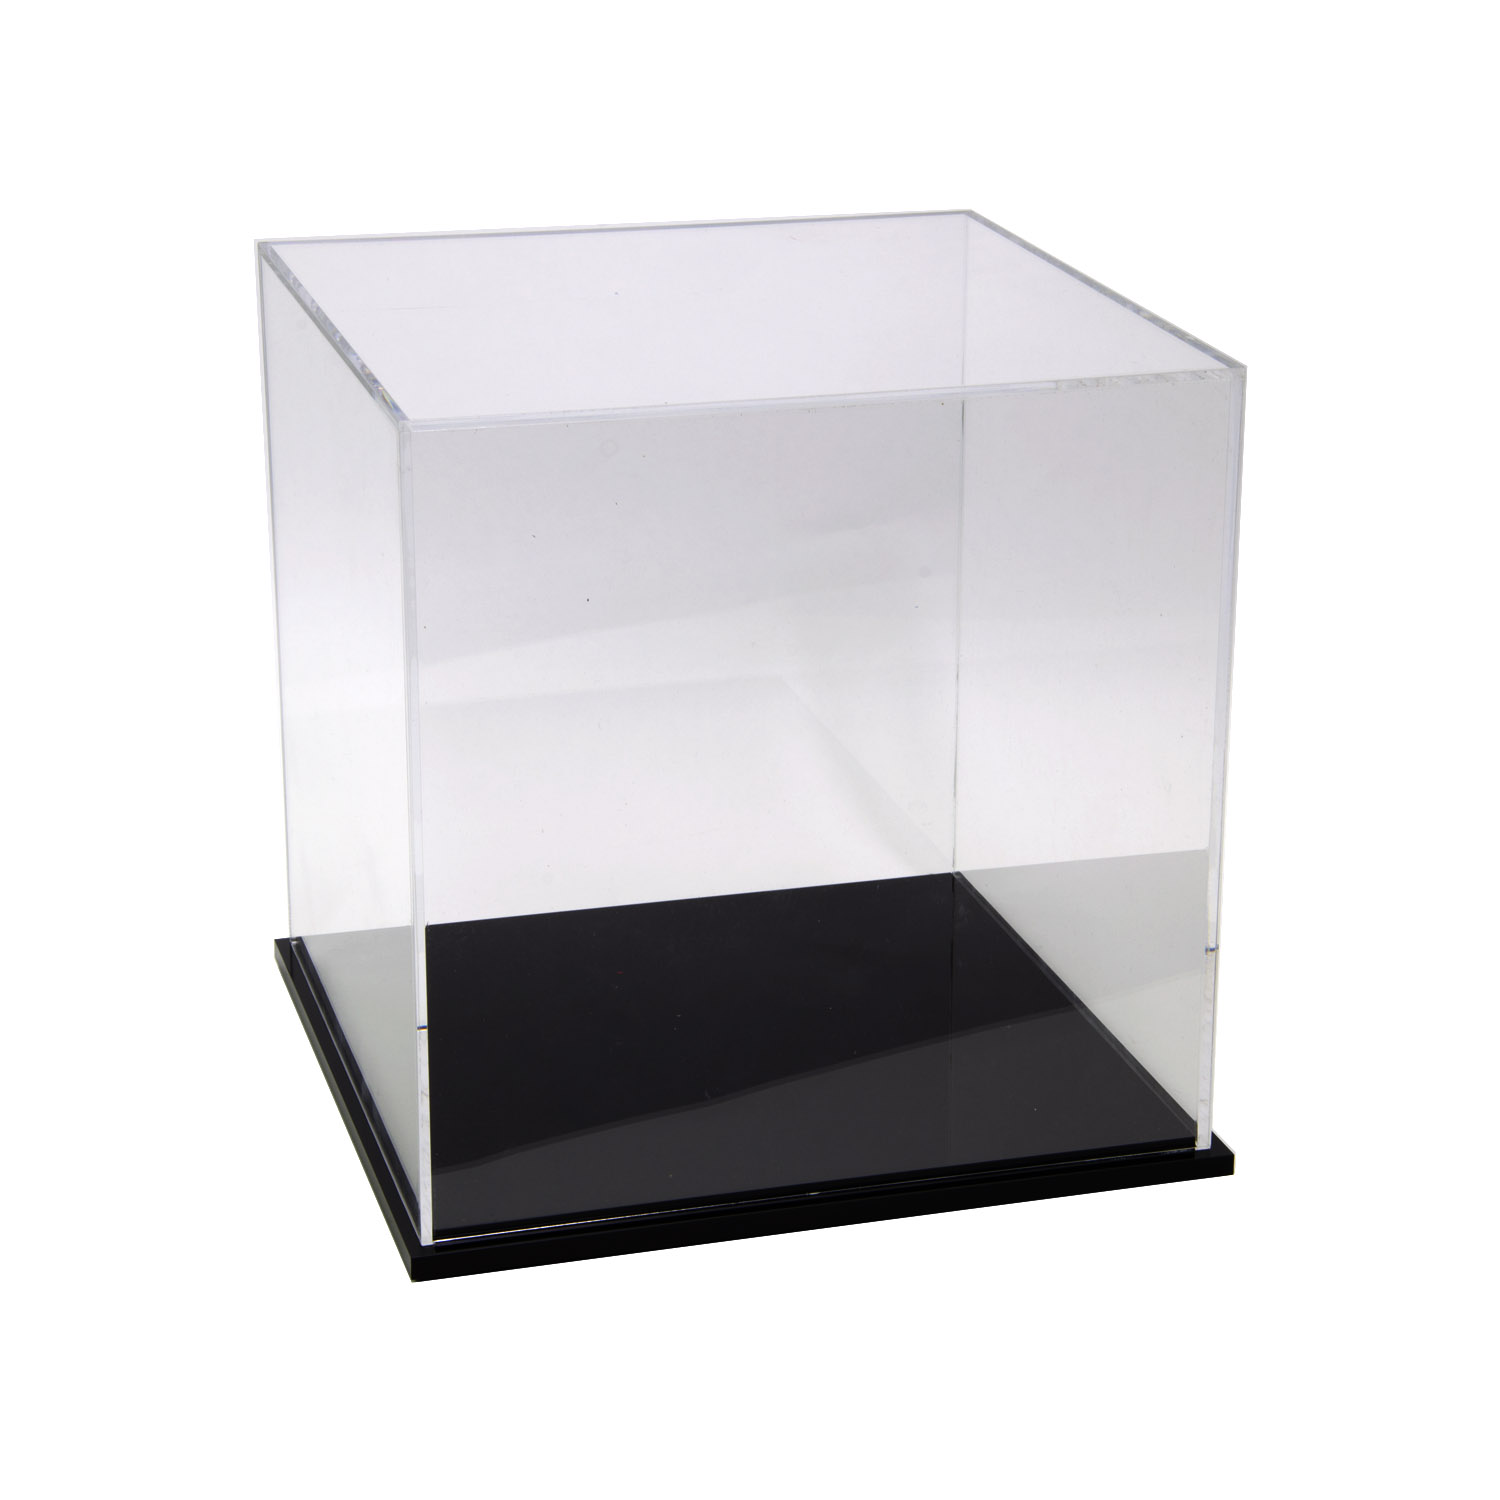 Large Acrylic Display Box Collectible Display Case Clear Store Display 18"x18x18 